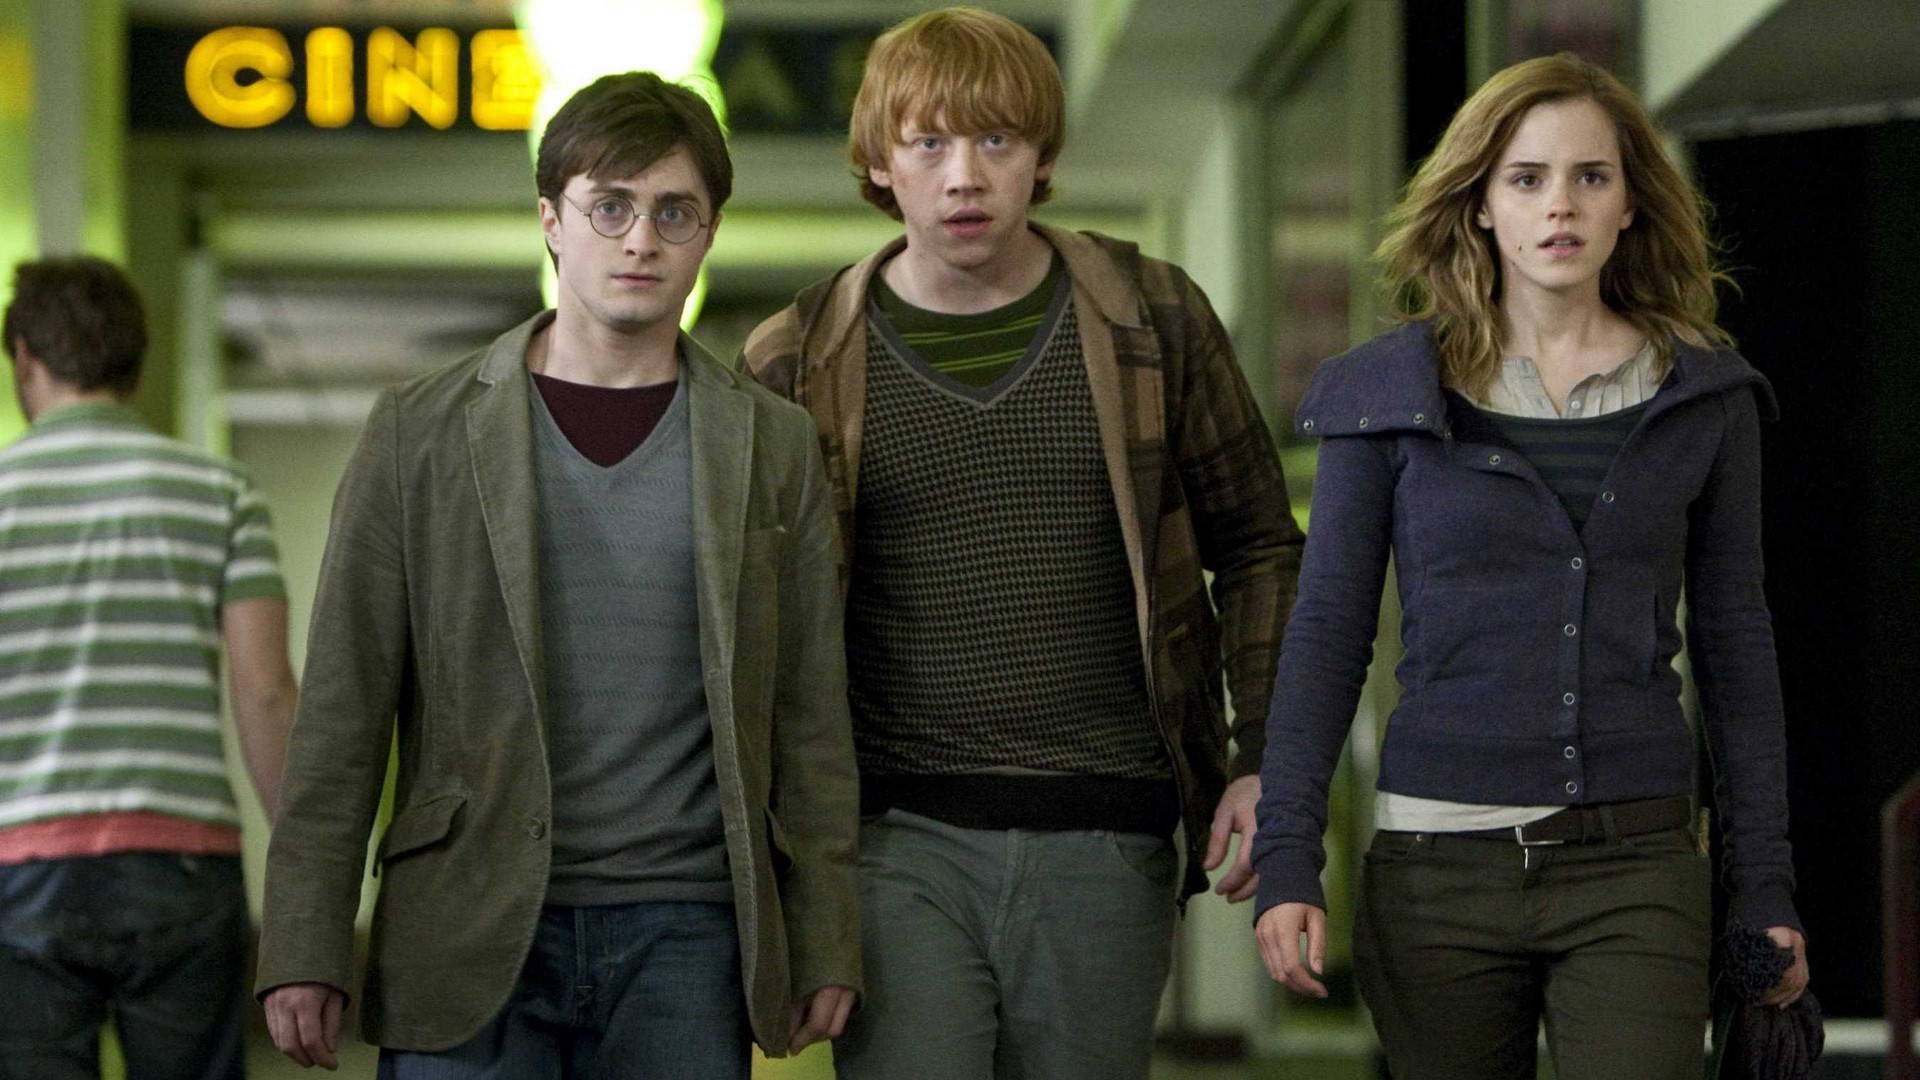 harry potter, movie, harry potter and the deathly hallows: part 1, daniel radcliffe, emma watson, hermione granger, ron weasley, rupert grint